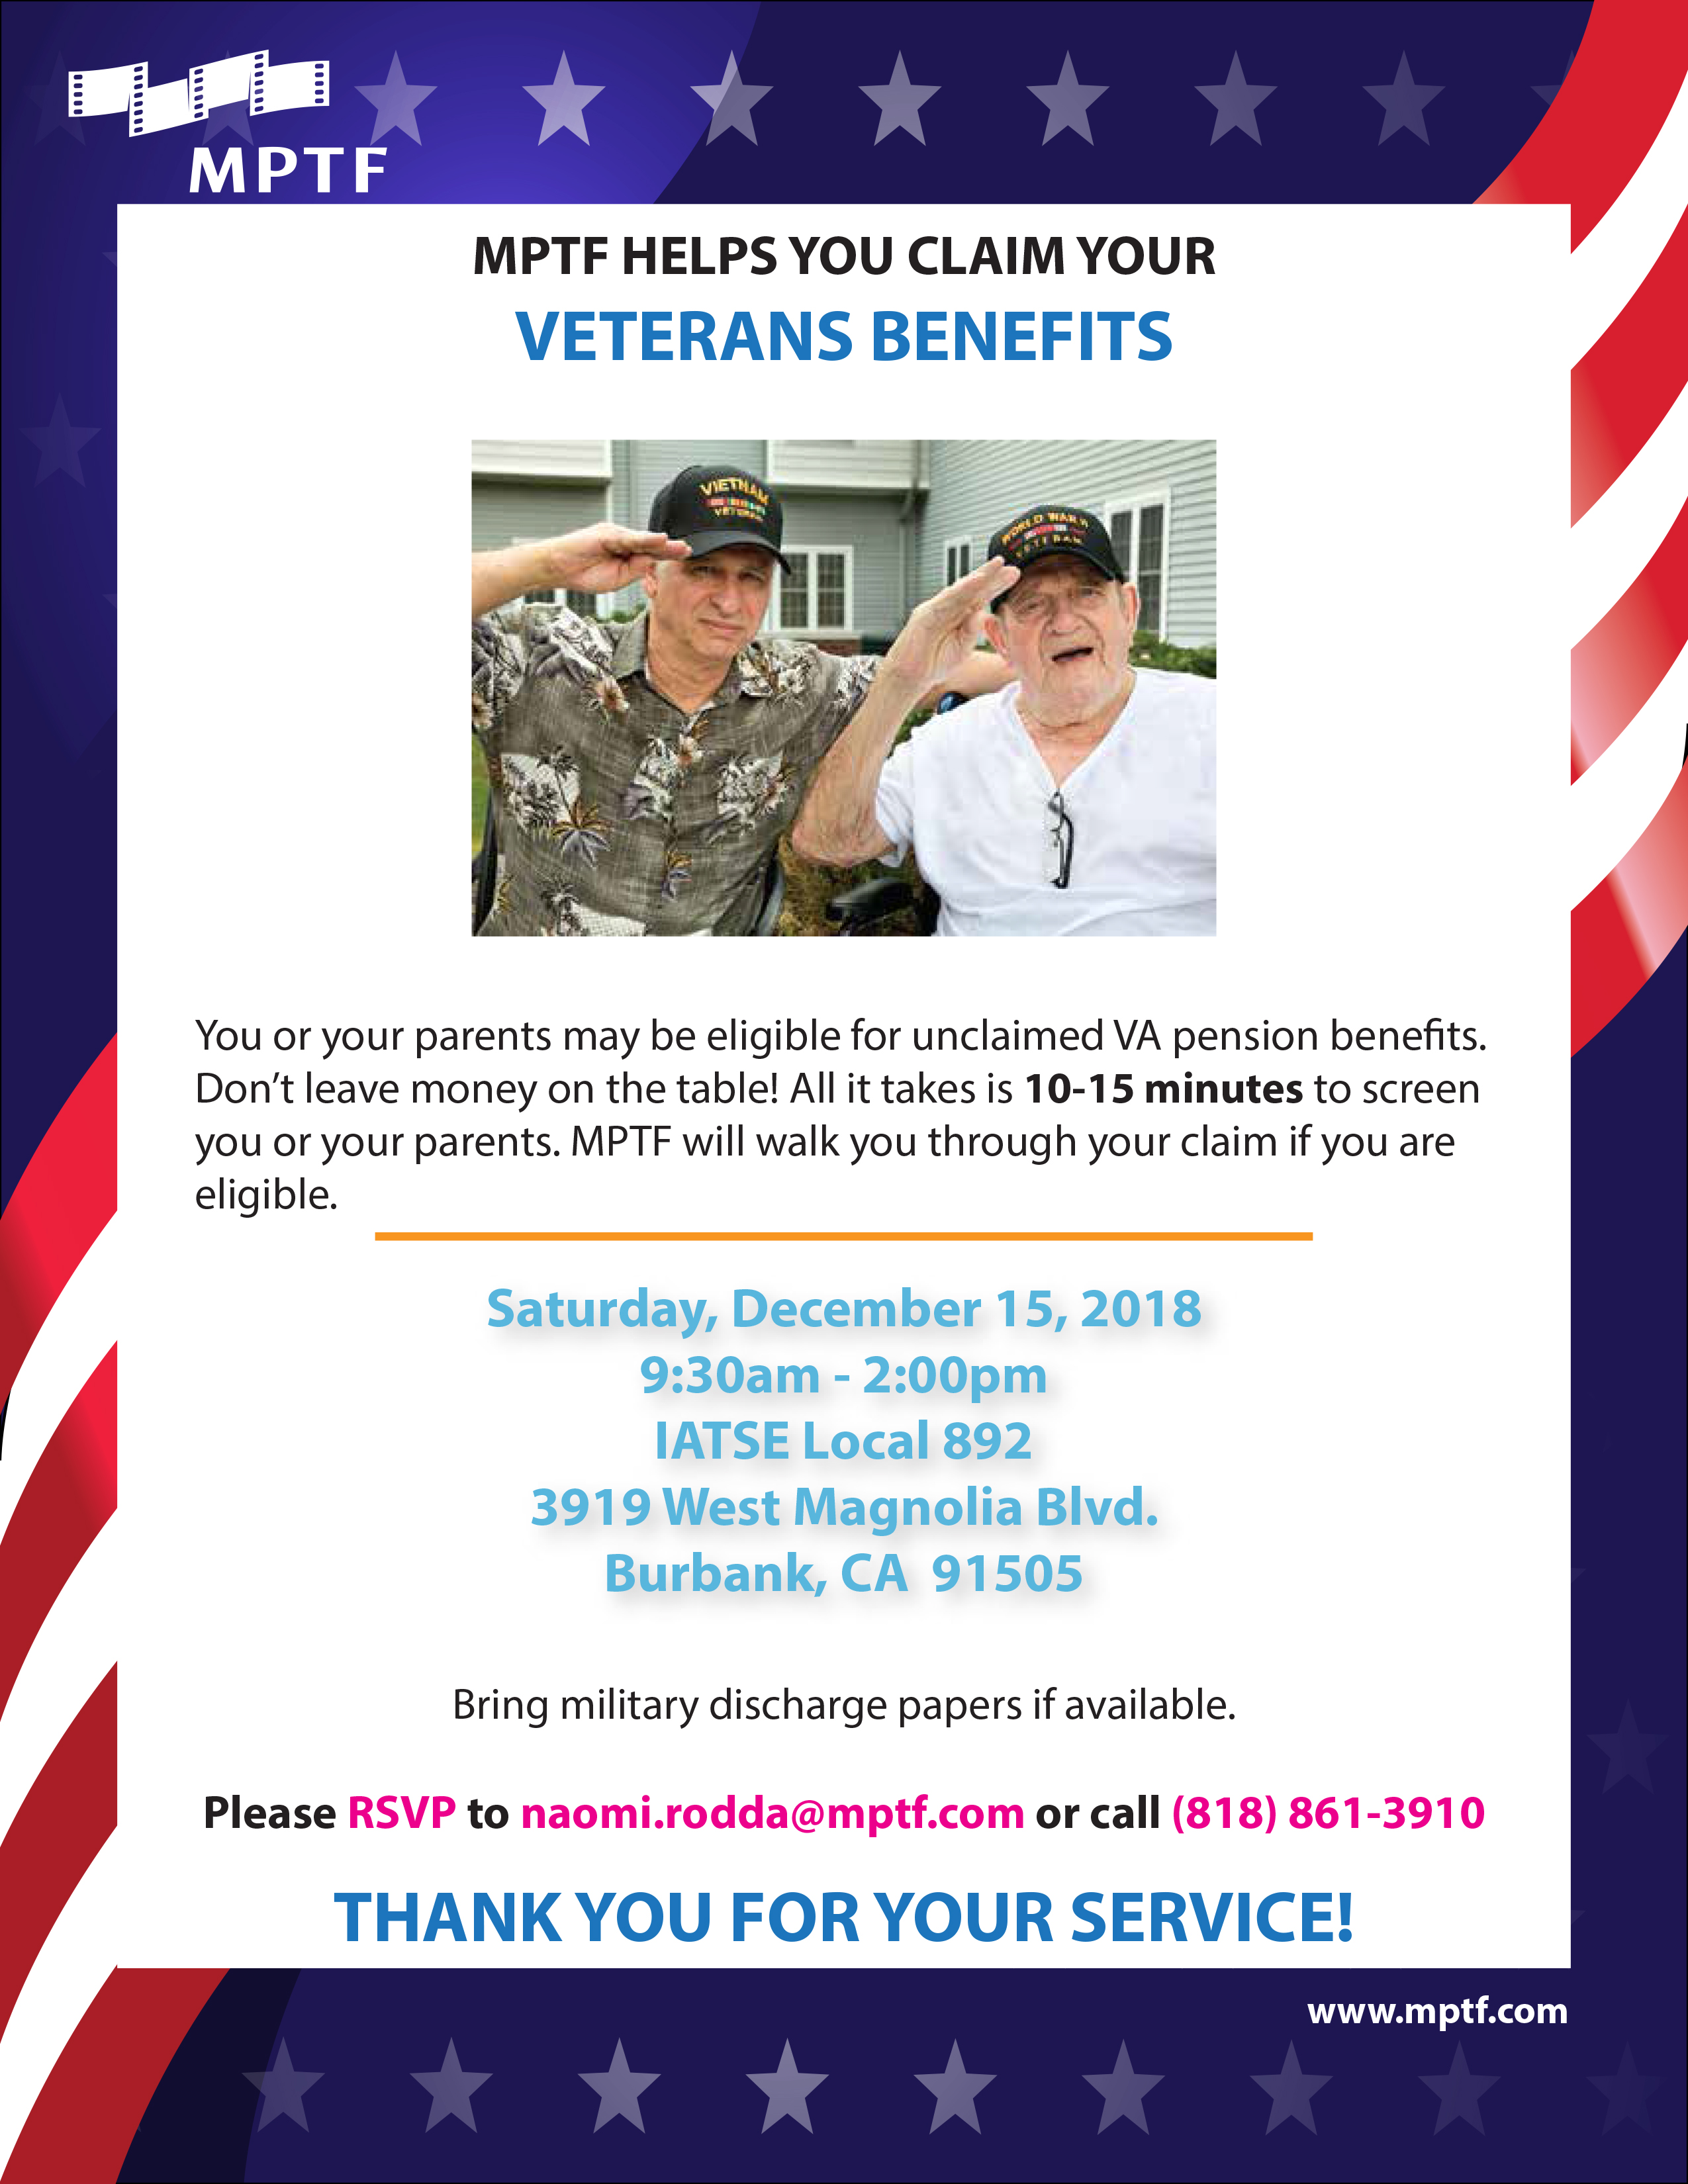 MPTF Helps you claim your Veterans Benefits